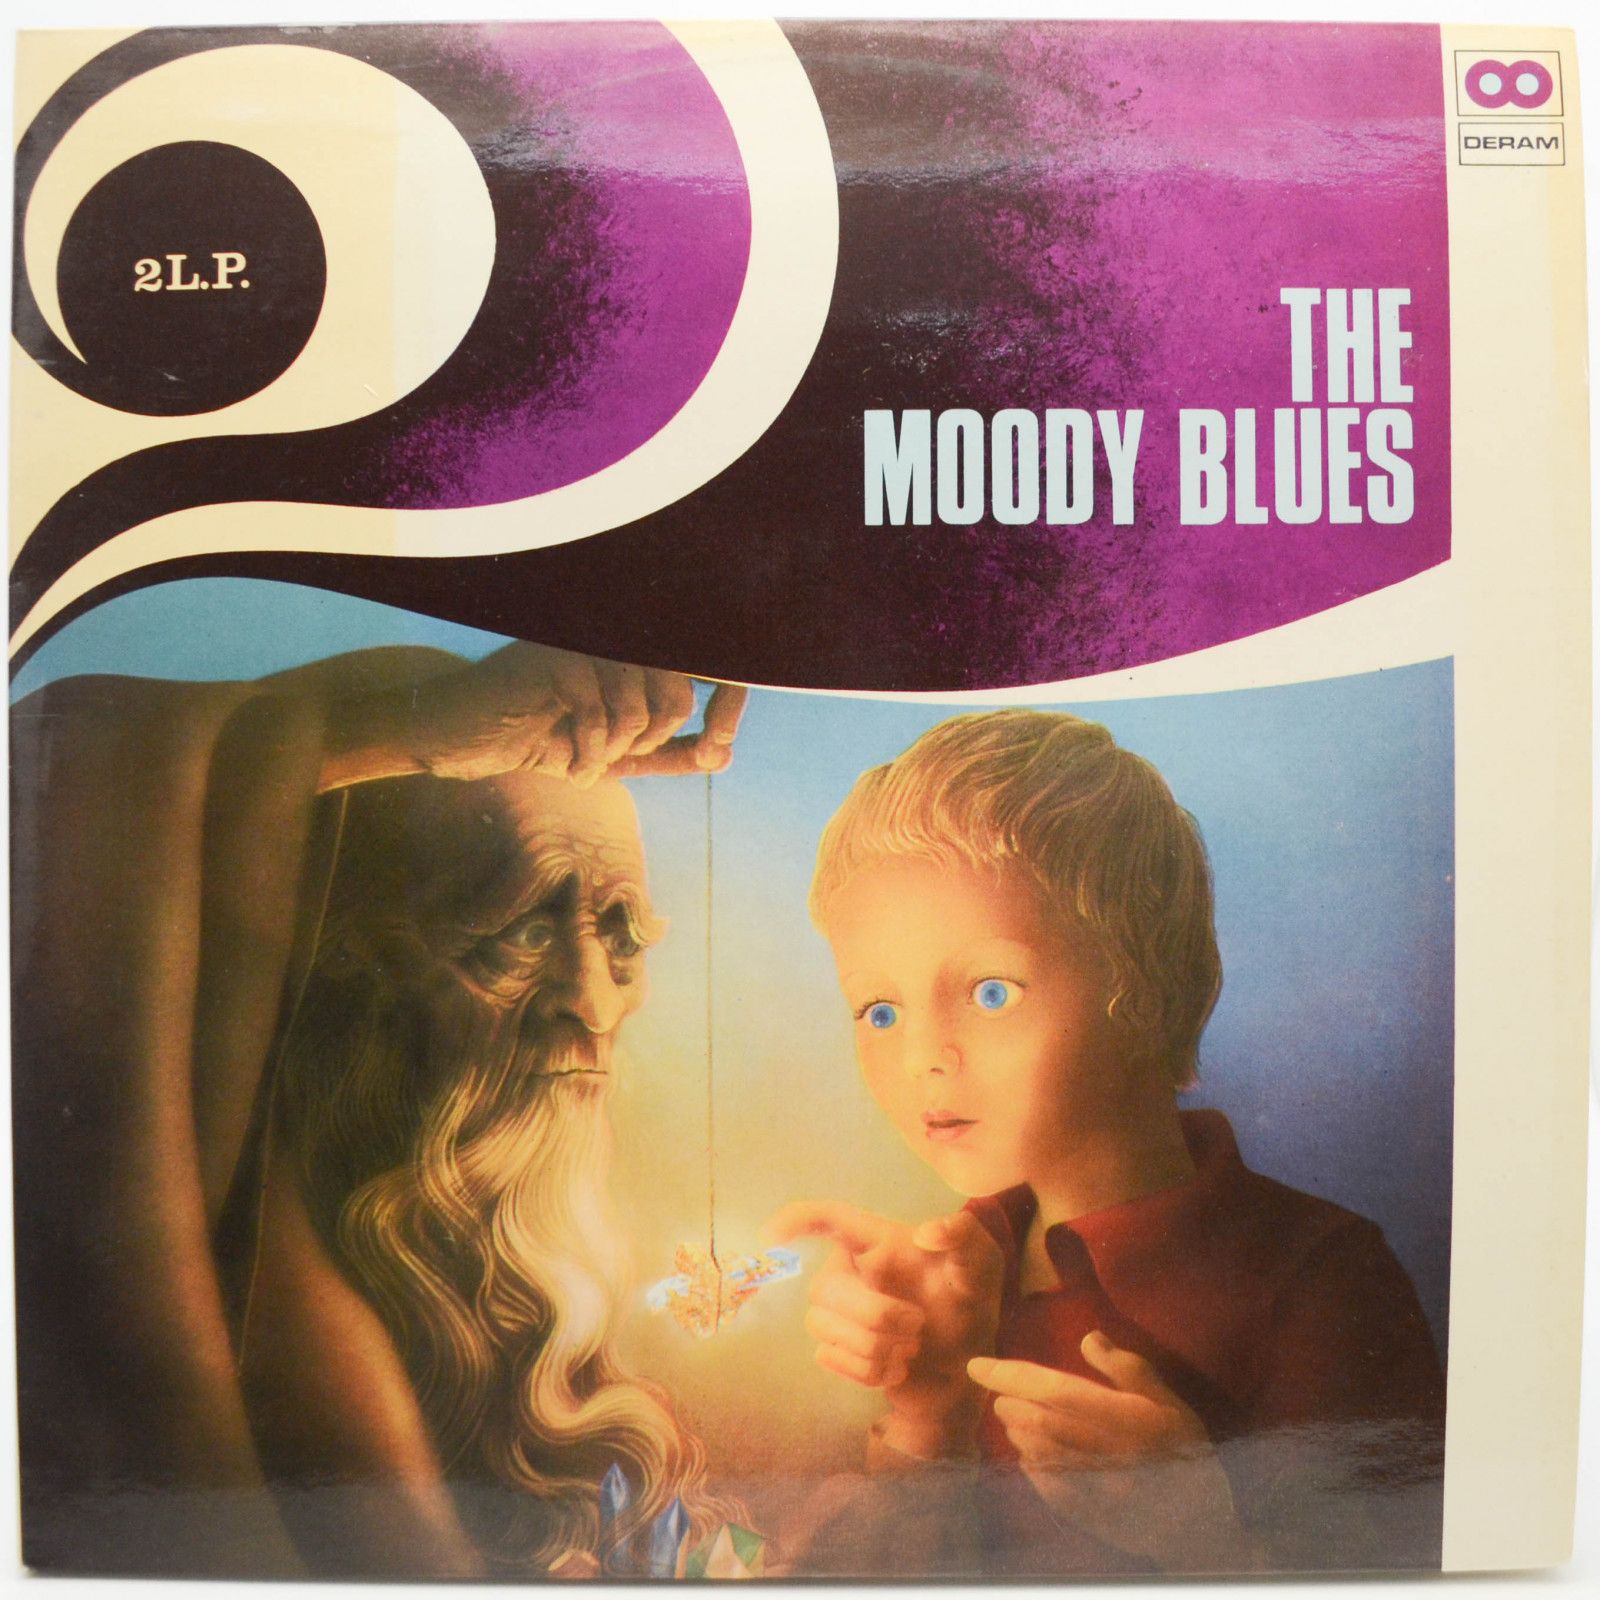 Moody Blues — The Great Moody Blues (2LP), 1978